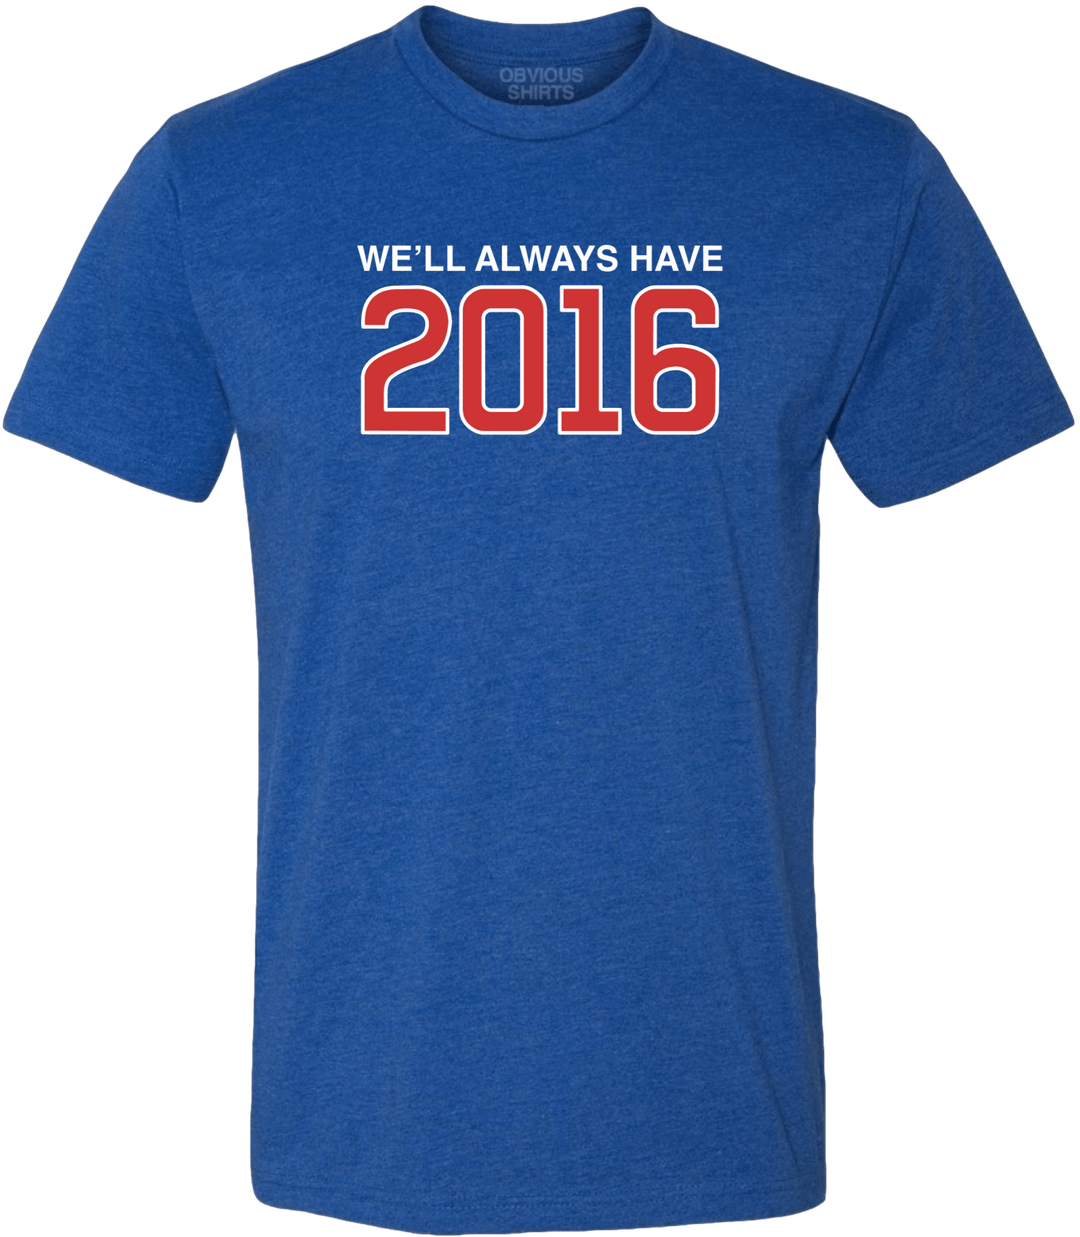 I Hate The White Sox - Chicago Cubs Fan Shirt - Text Ver - Beef Shirts